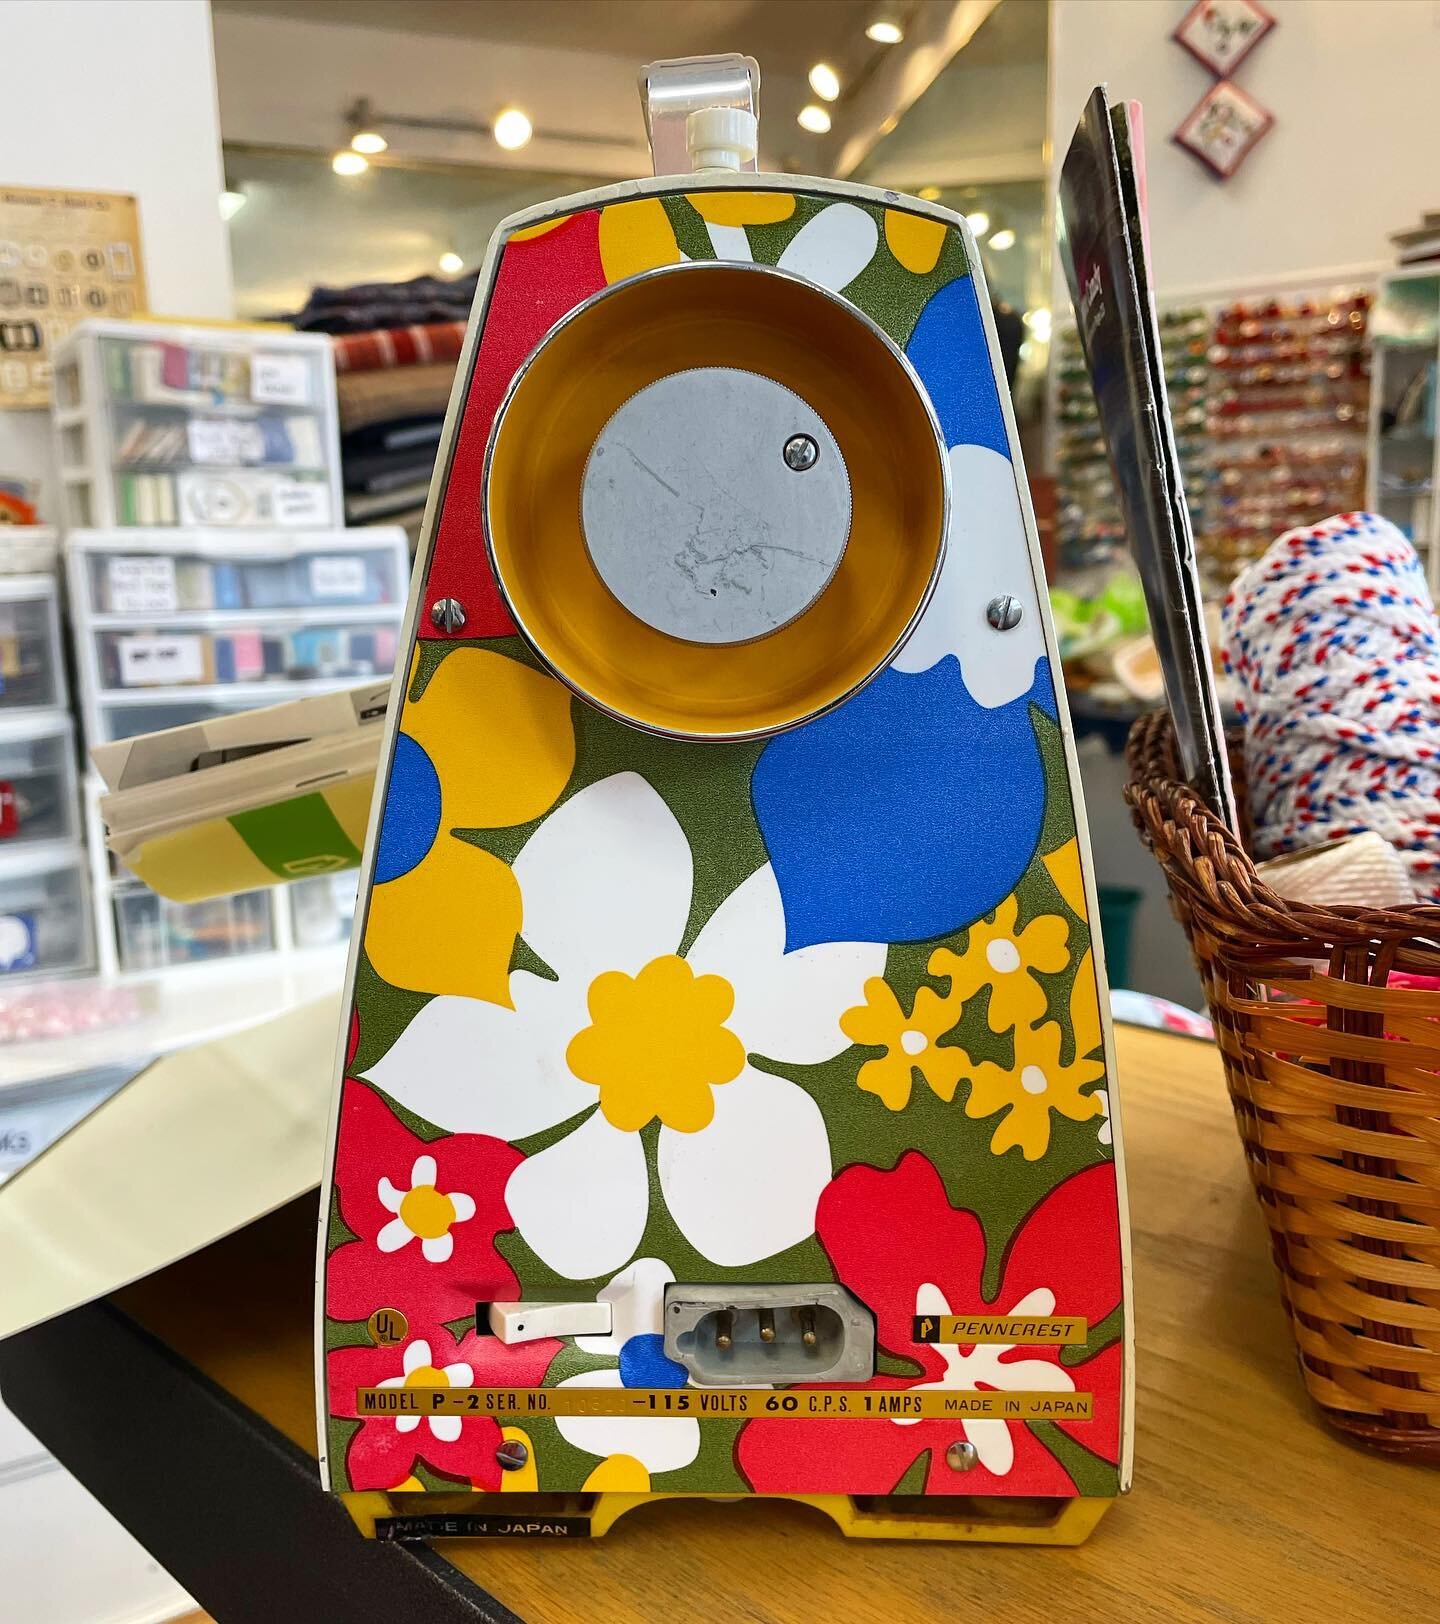 #FlowerPower - Today, I met the cutest seeing machine ever made. It&rsquo;s old-school and all metal parts, and it&rsquo;s at @sewgreenrochester, my favorite non-profit organization in #ROC if you just gotta have it. #vintage #sewing #sew #adorbs #Ad